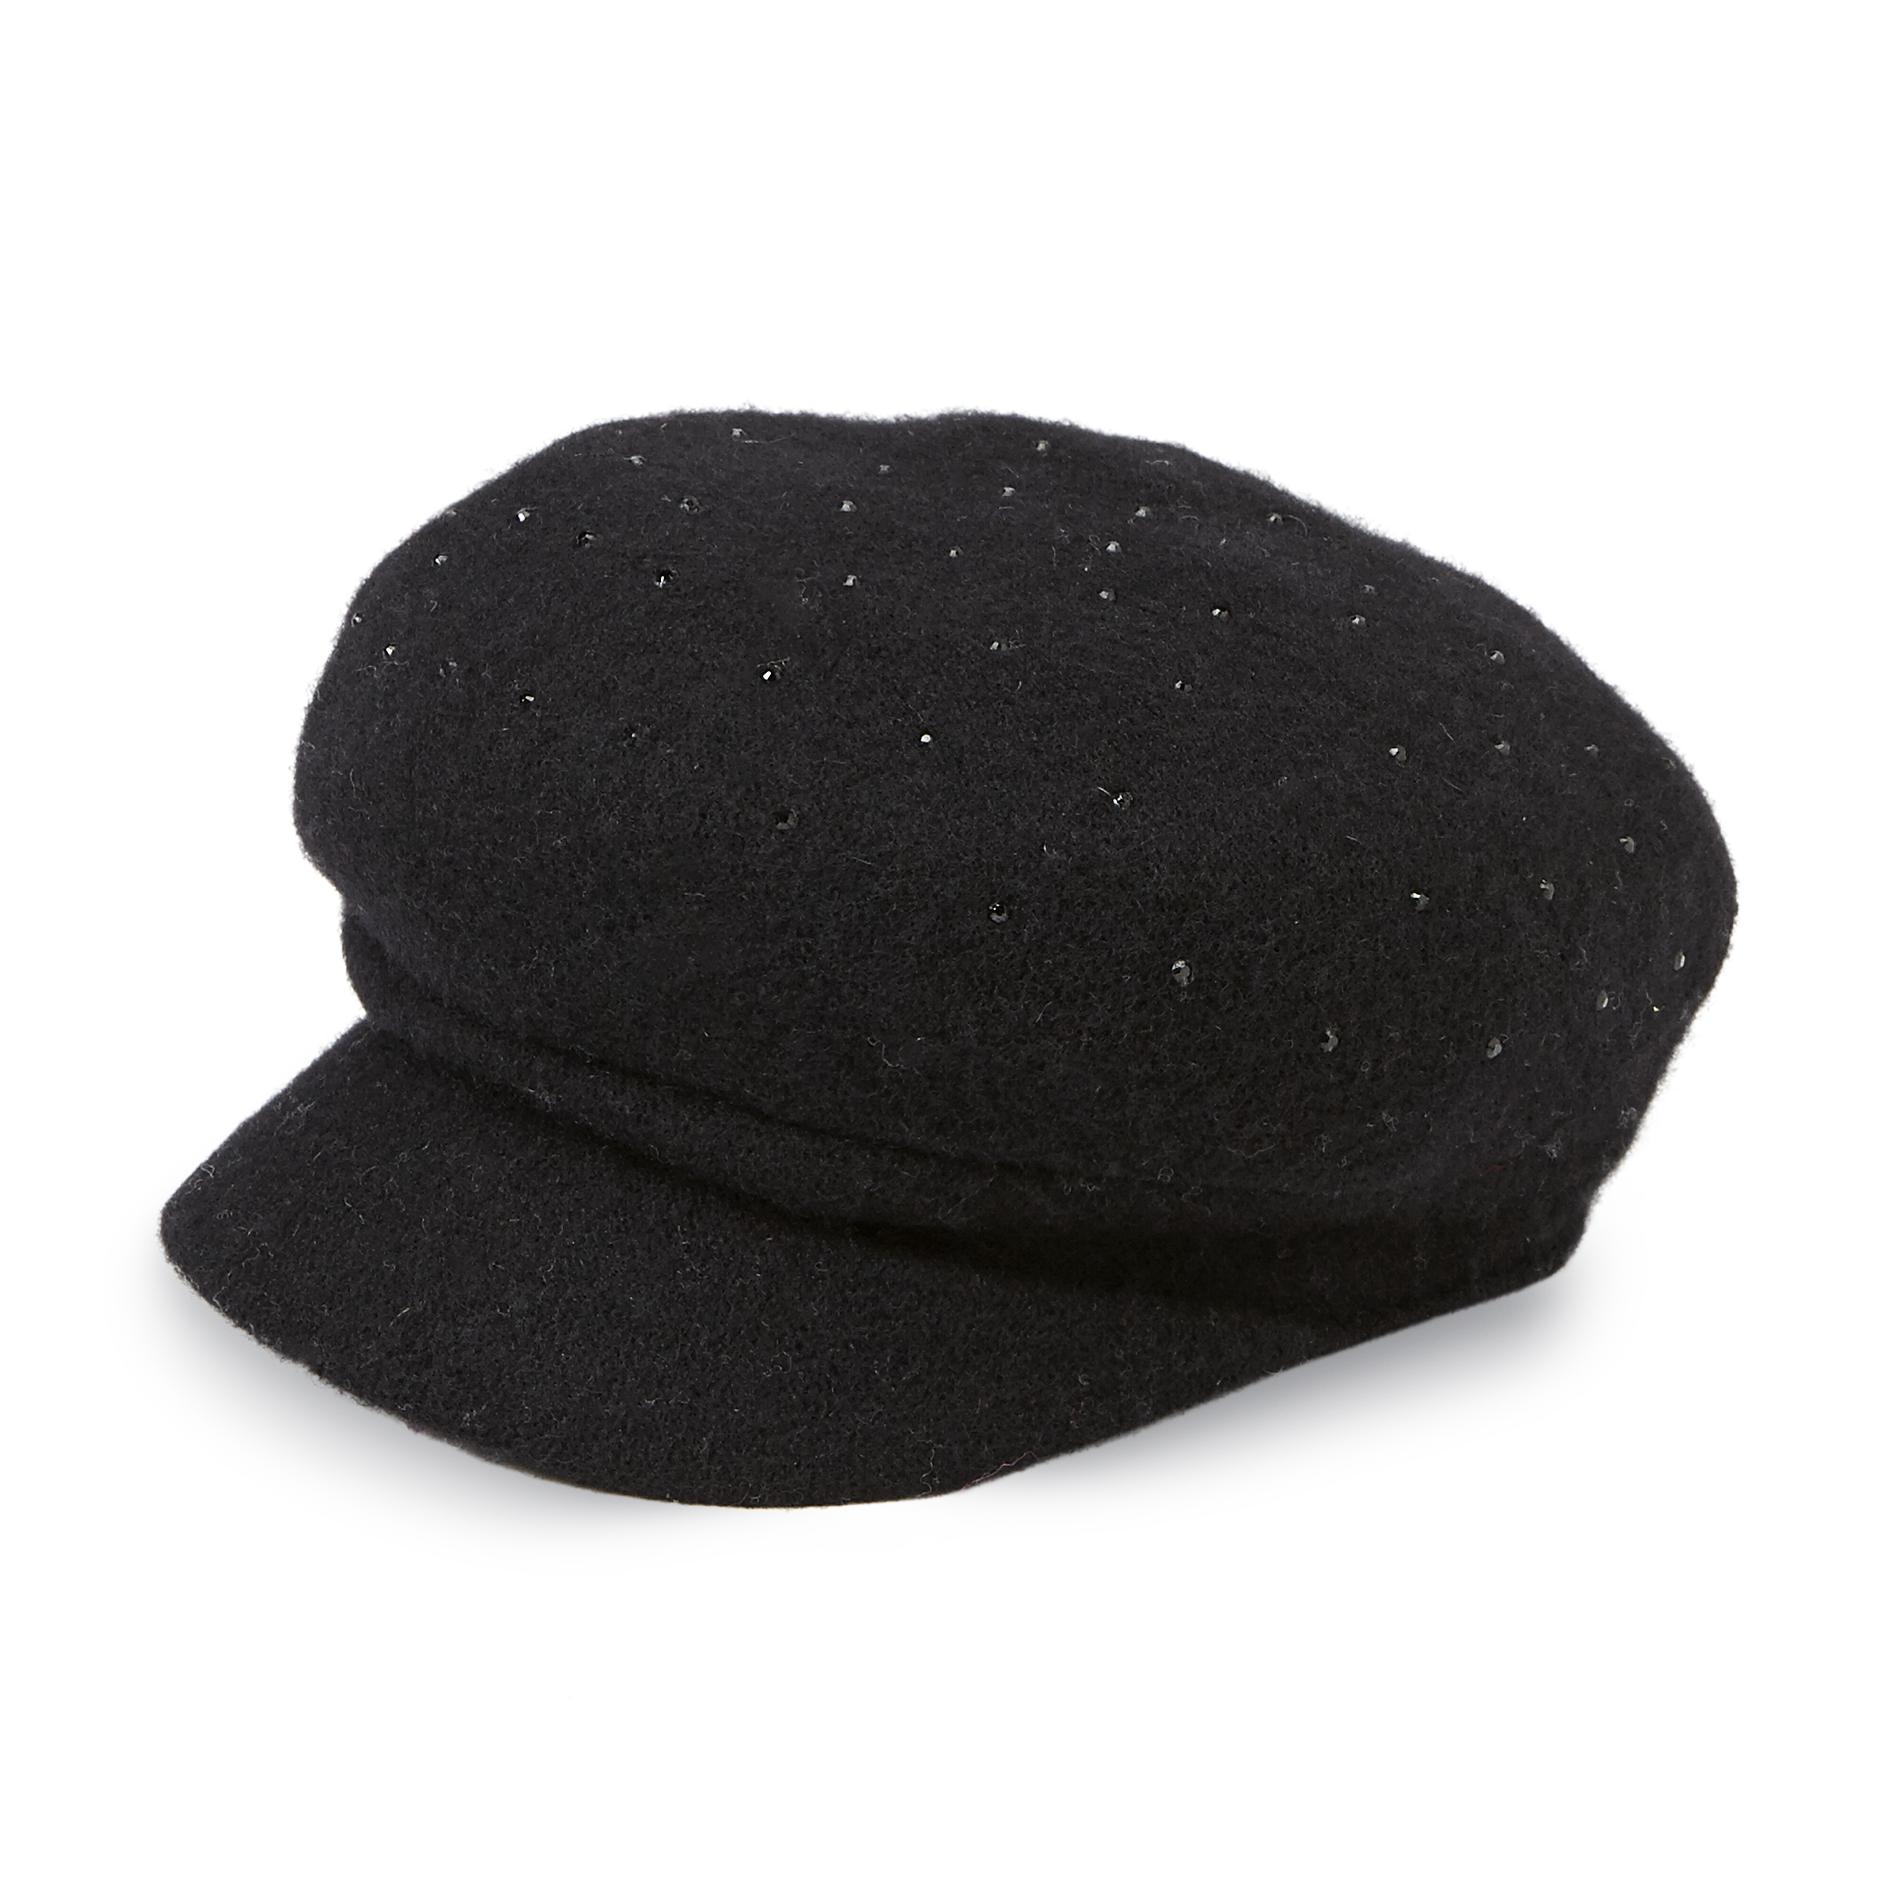 Attention Women's Embellished Cabbie Hat